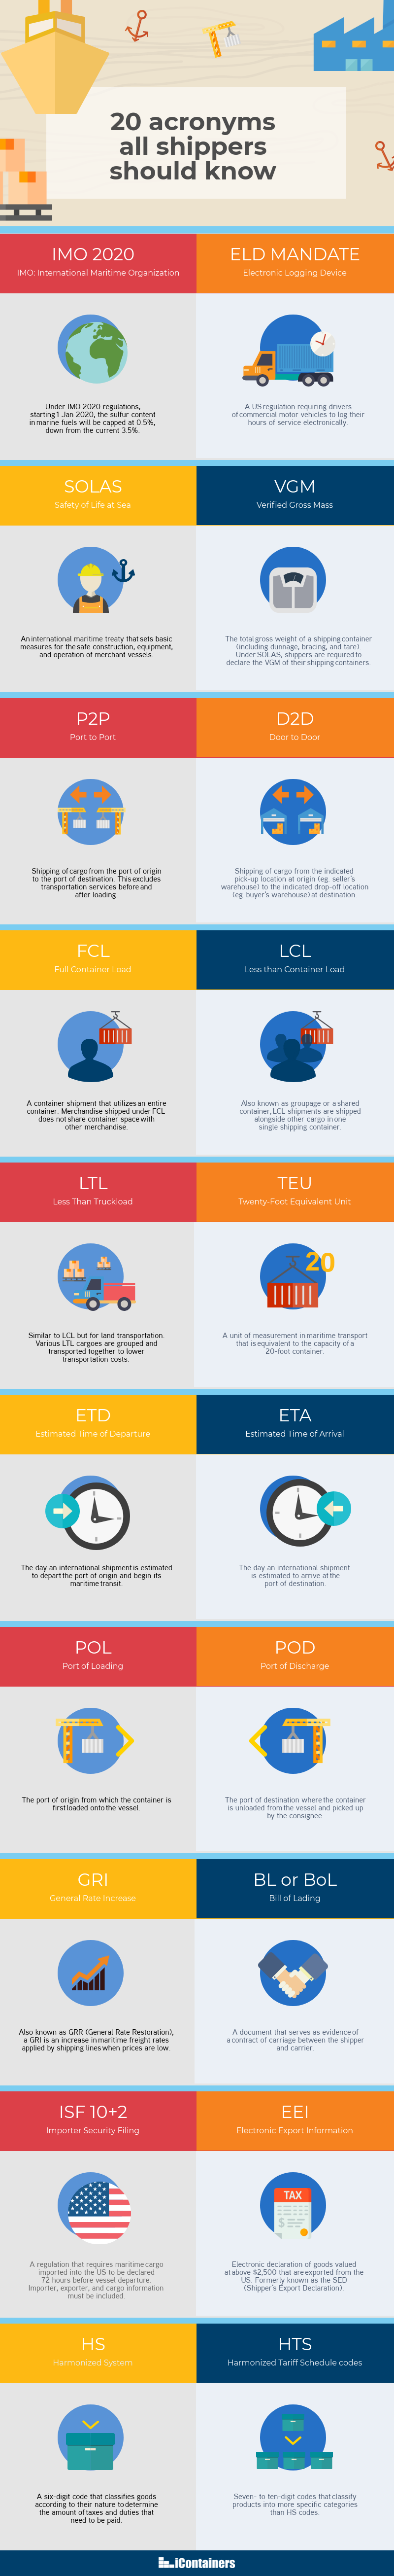 20-shipping-acronyms-all-shippers-should-know-infographic.png